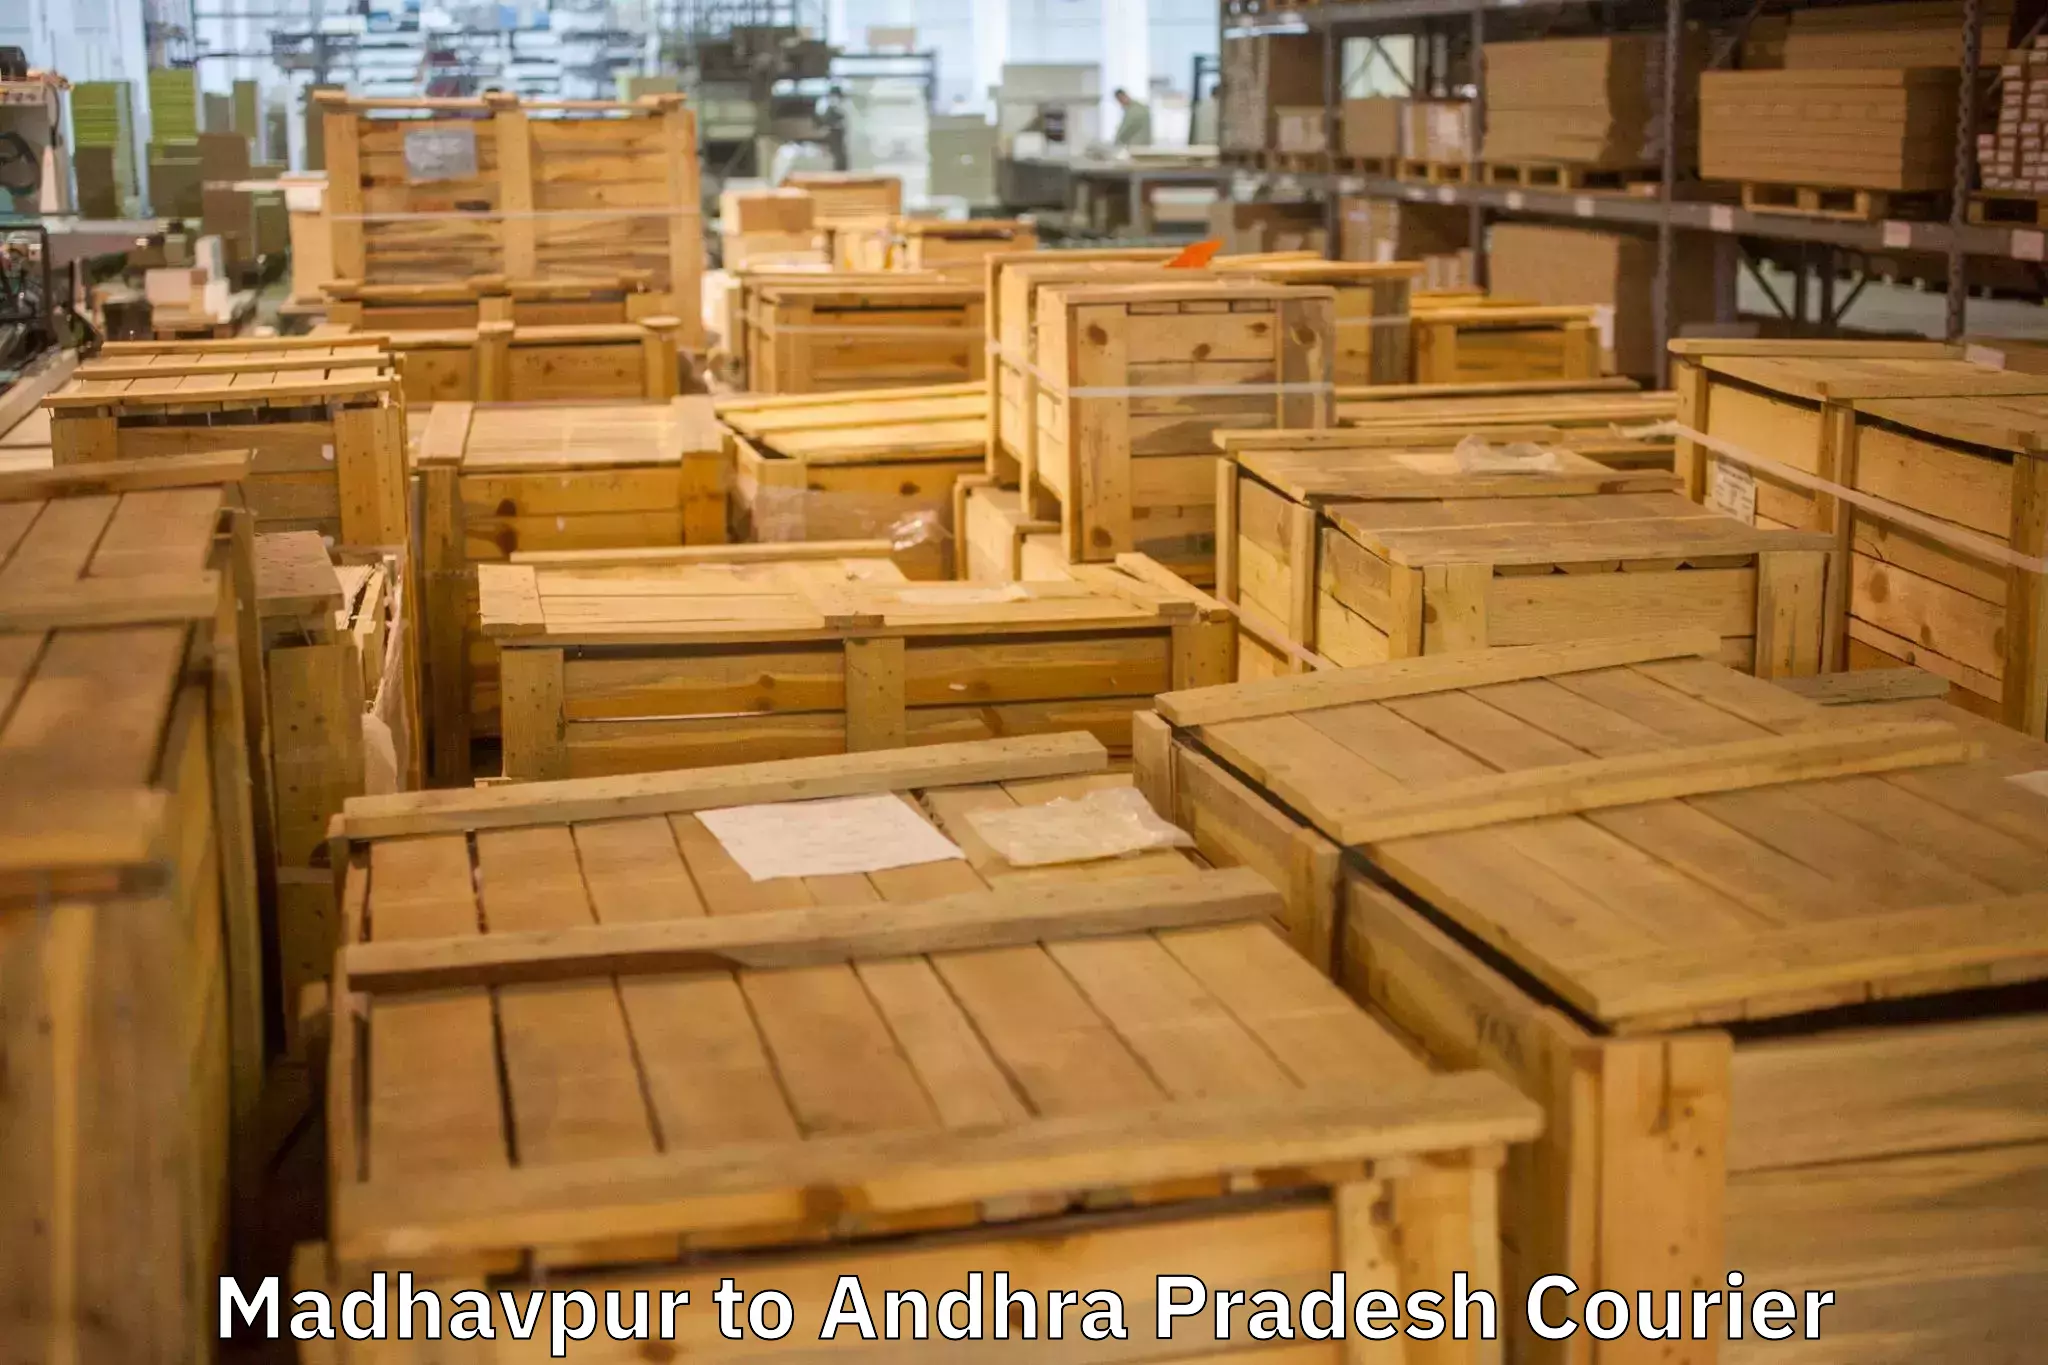 Professional relocation services Madhavpur to Gullapalli